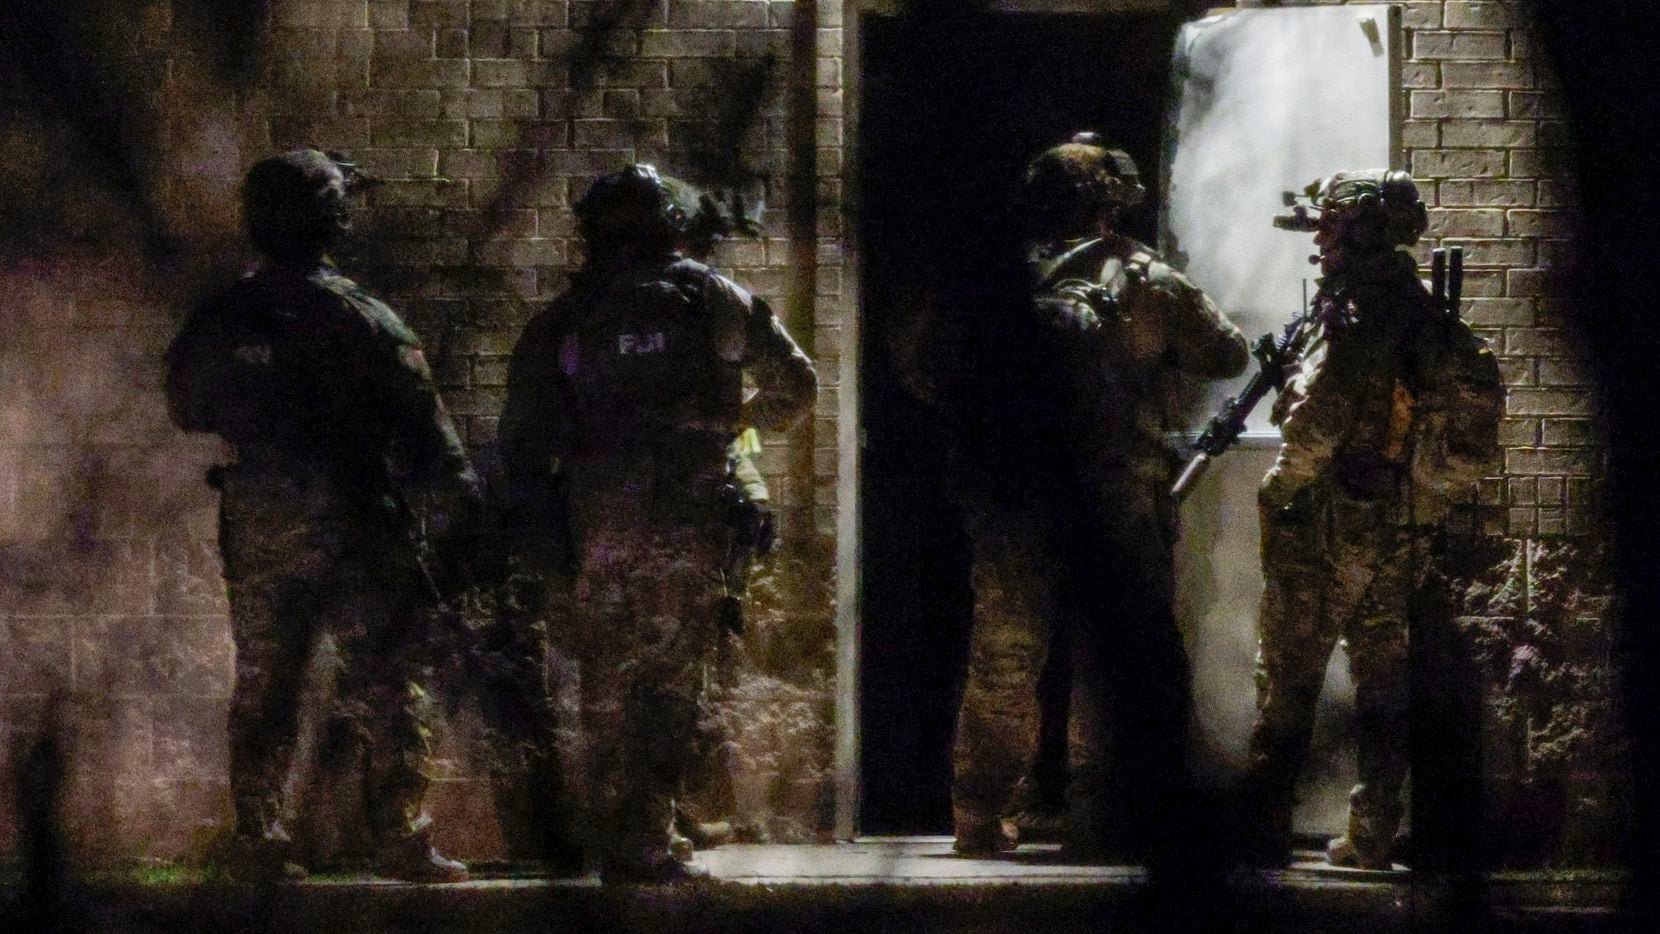 Members of the FBI exit a side entrance while conducting SWAT operations at Congregation...